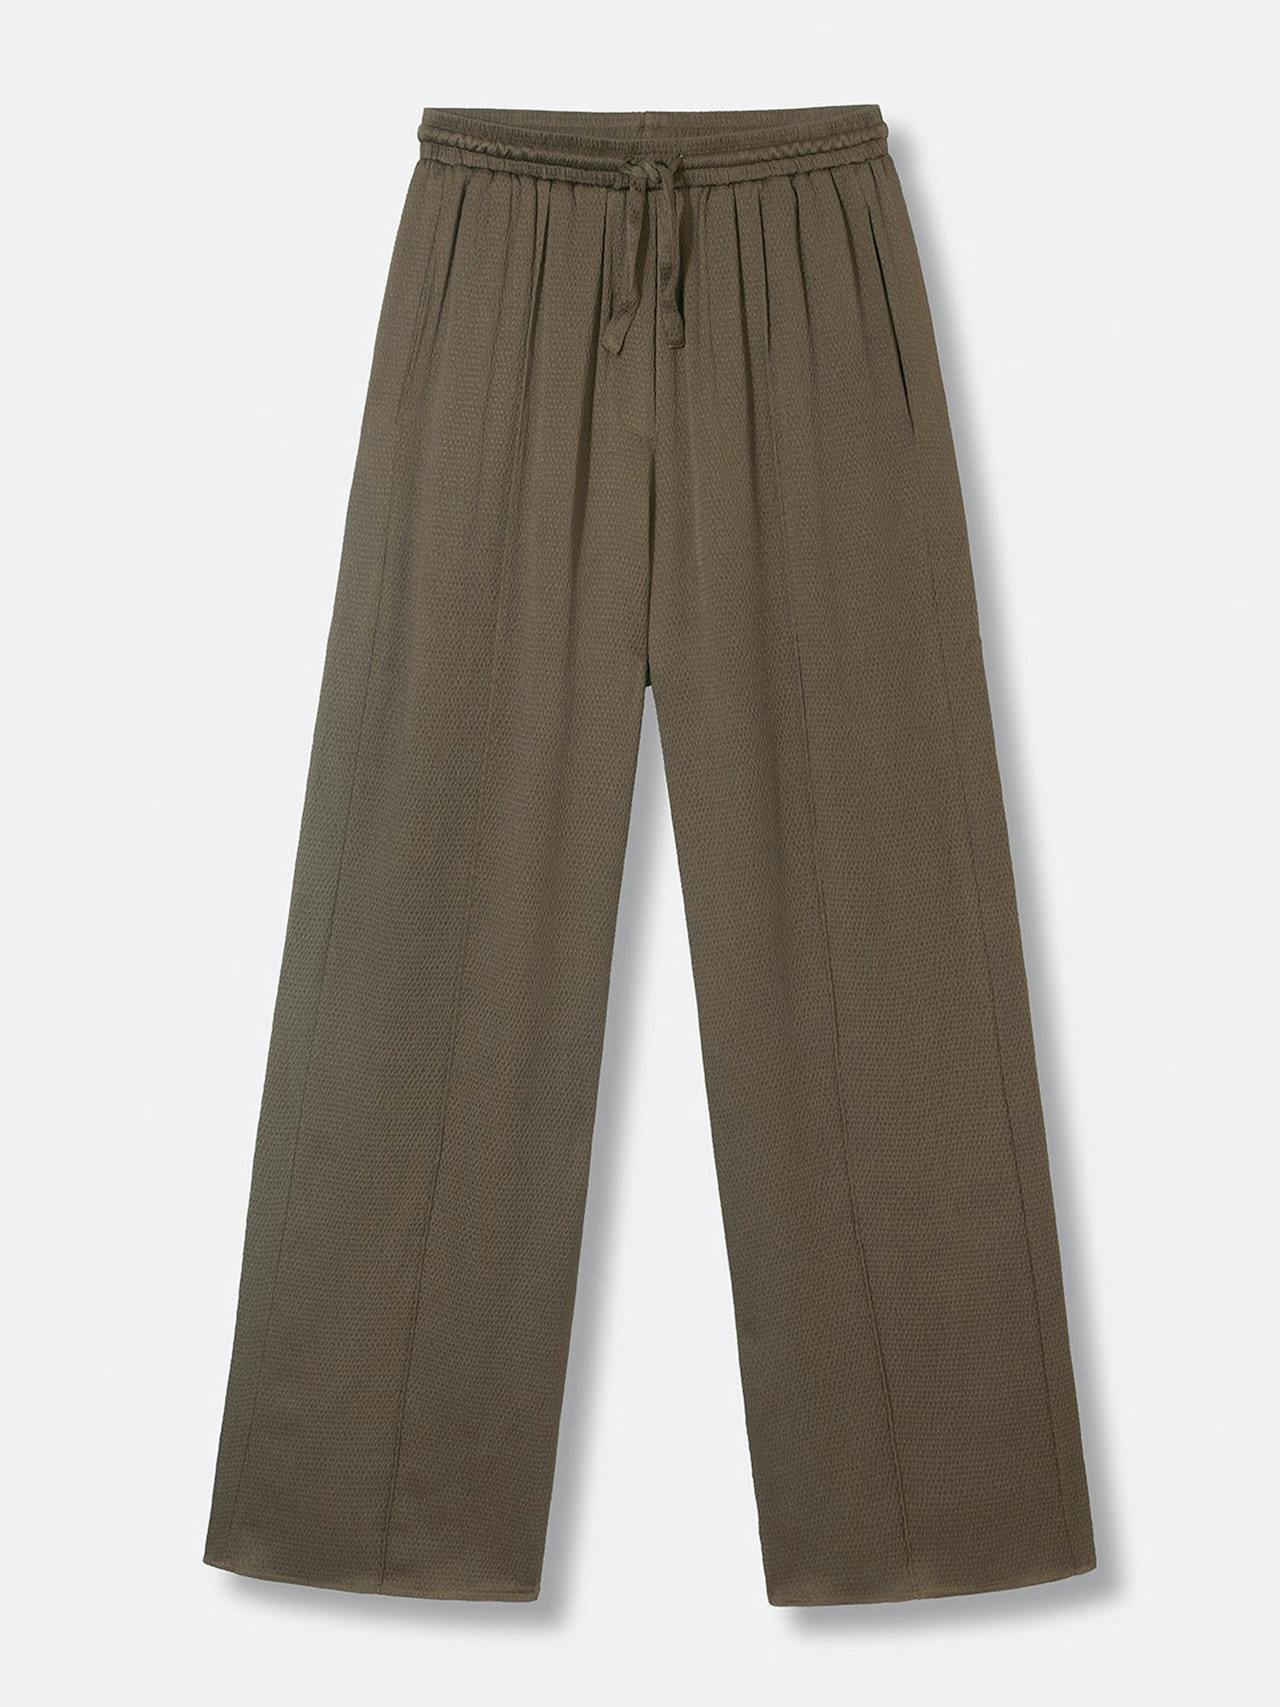 Cleo olive satin trousers